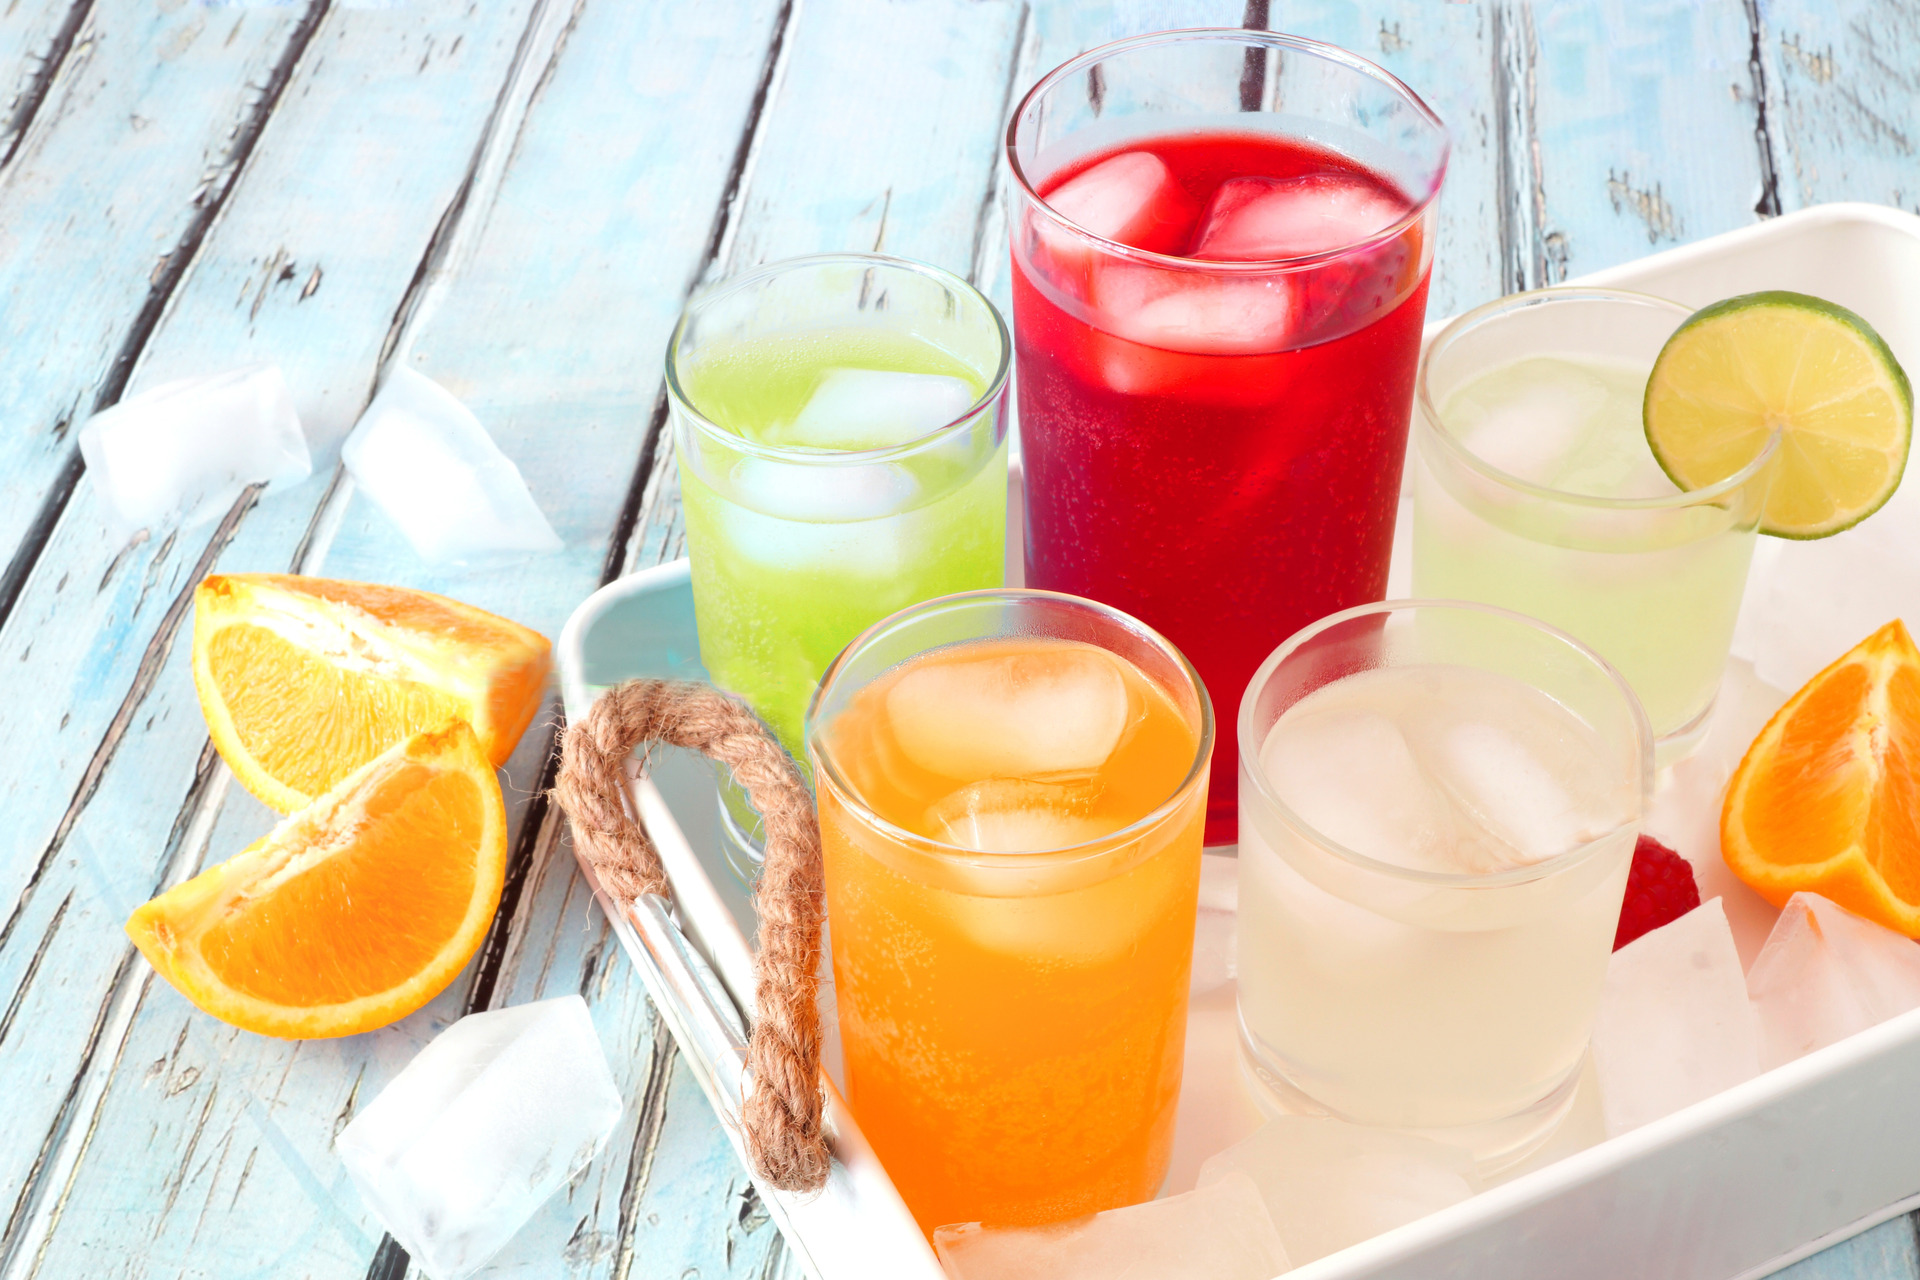 Tray of cool colorful summer drinks against a rustic wood background